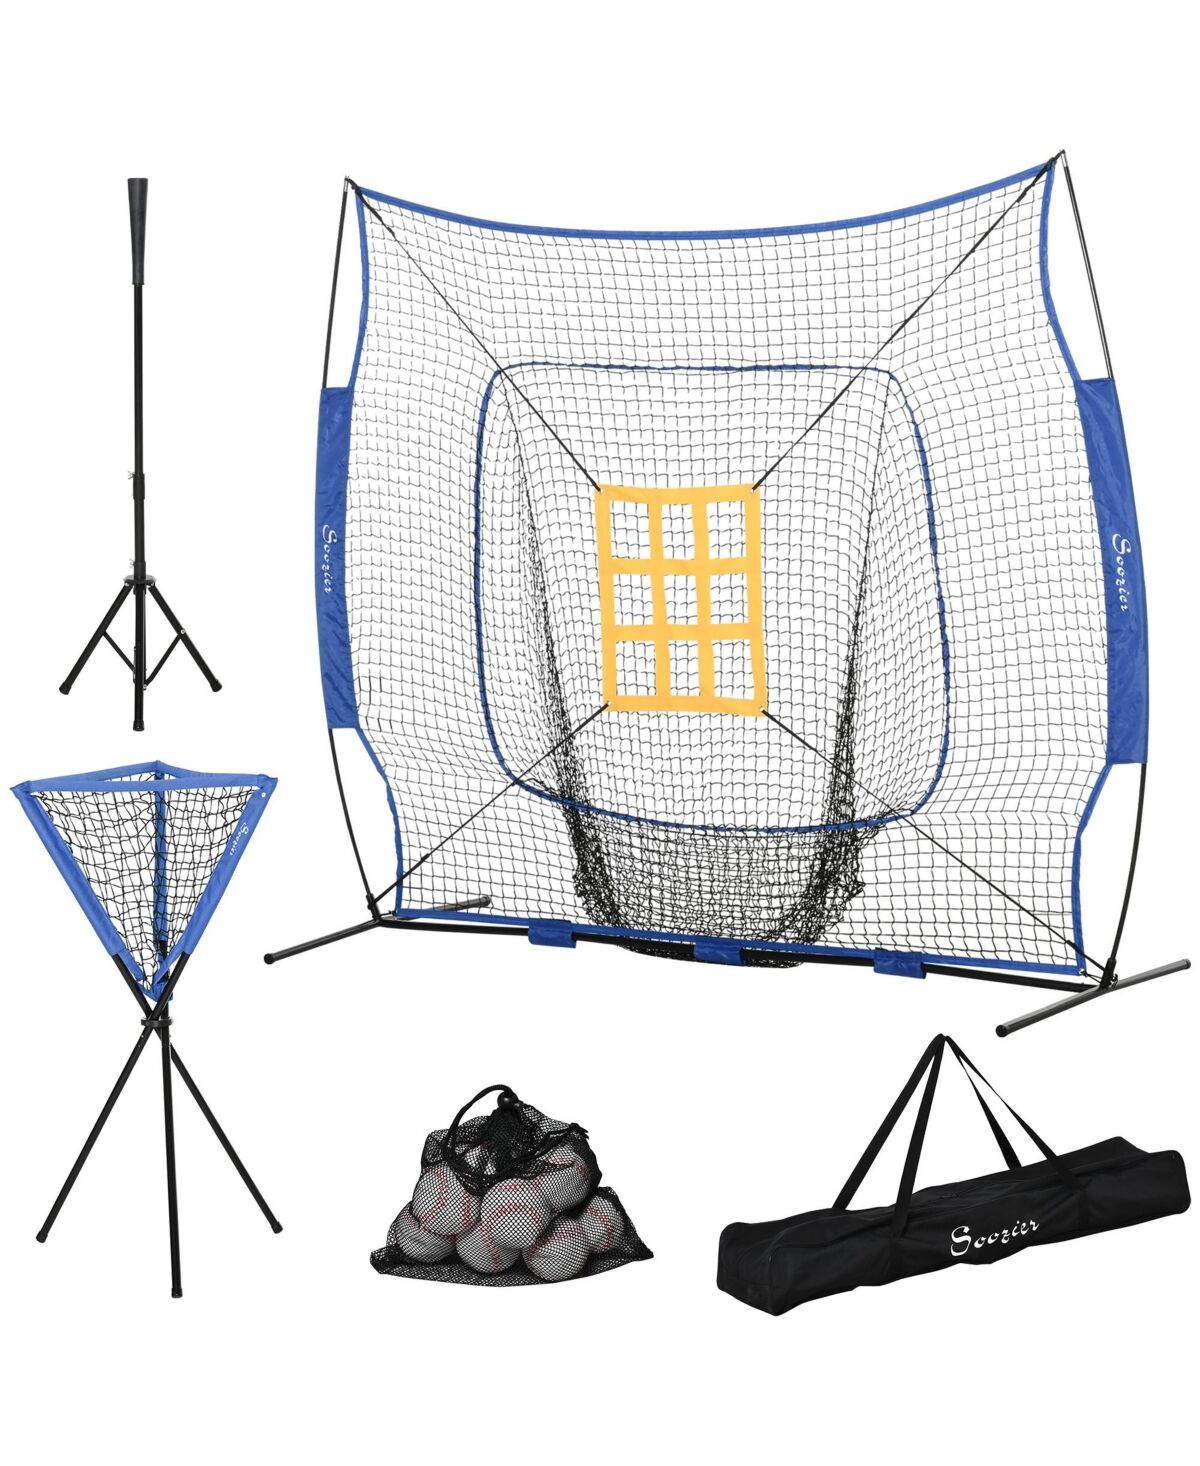 Soozier Baseball Practice Net Set with 7.5x7ft Catcher Net, Ball Caddy and Batting Tee, Portable Baseball Practice Equipment with Carry Bag for Hittin